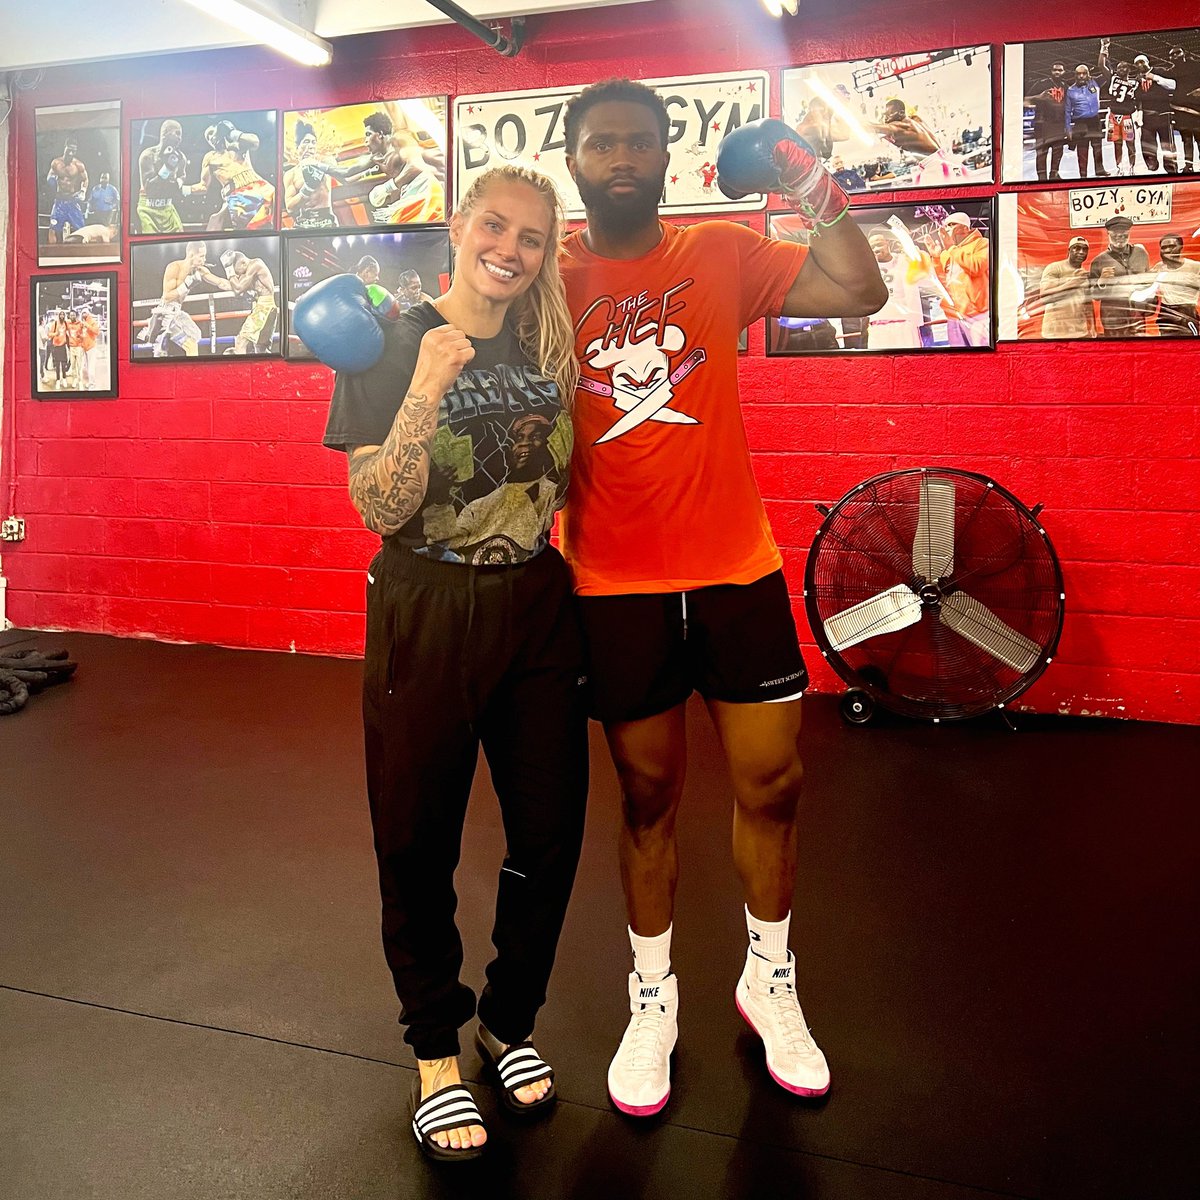 Good to meet the next welterweight champ @JaronEnnis today in his gym in Philly 🥊✨ 

Getting some solid work In 💪🏼

#Boxing #WorldChamp #BlondeBomber #BootsEnnis #Philly #PhillyBoxing